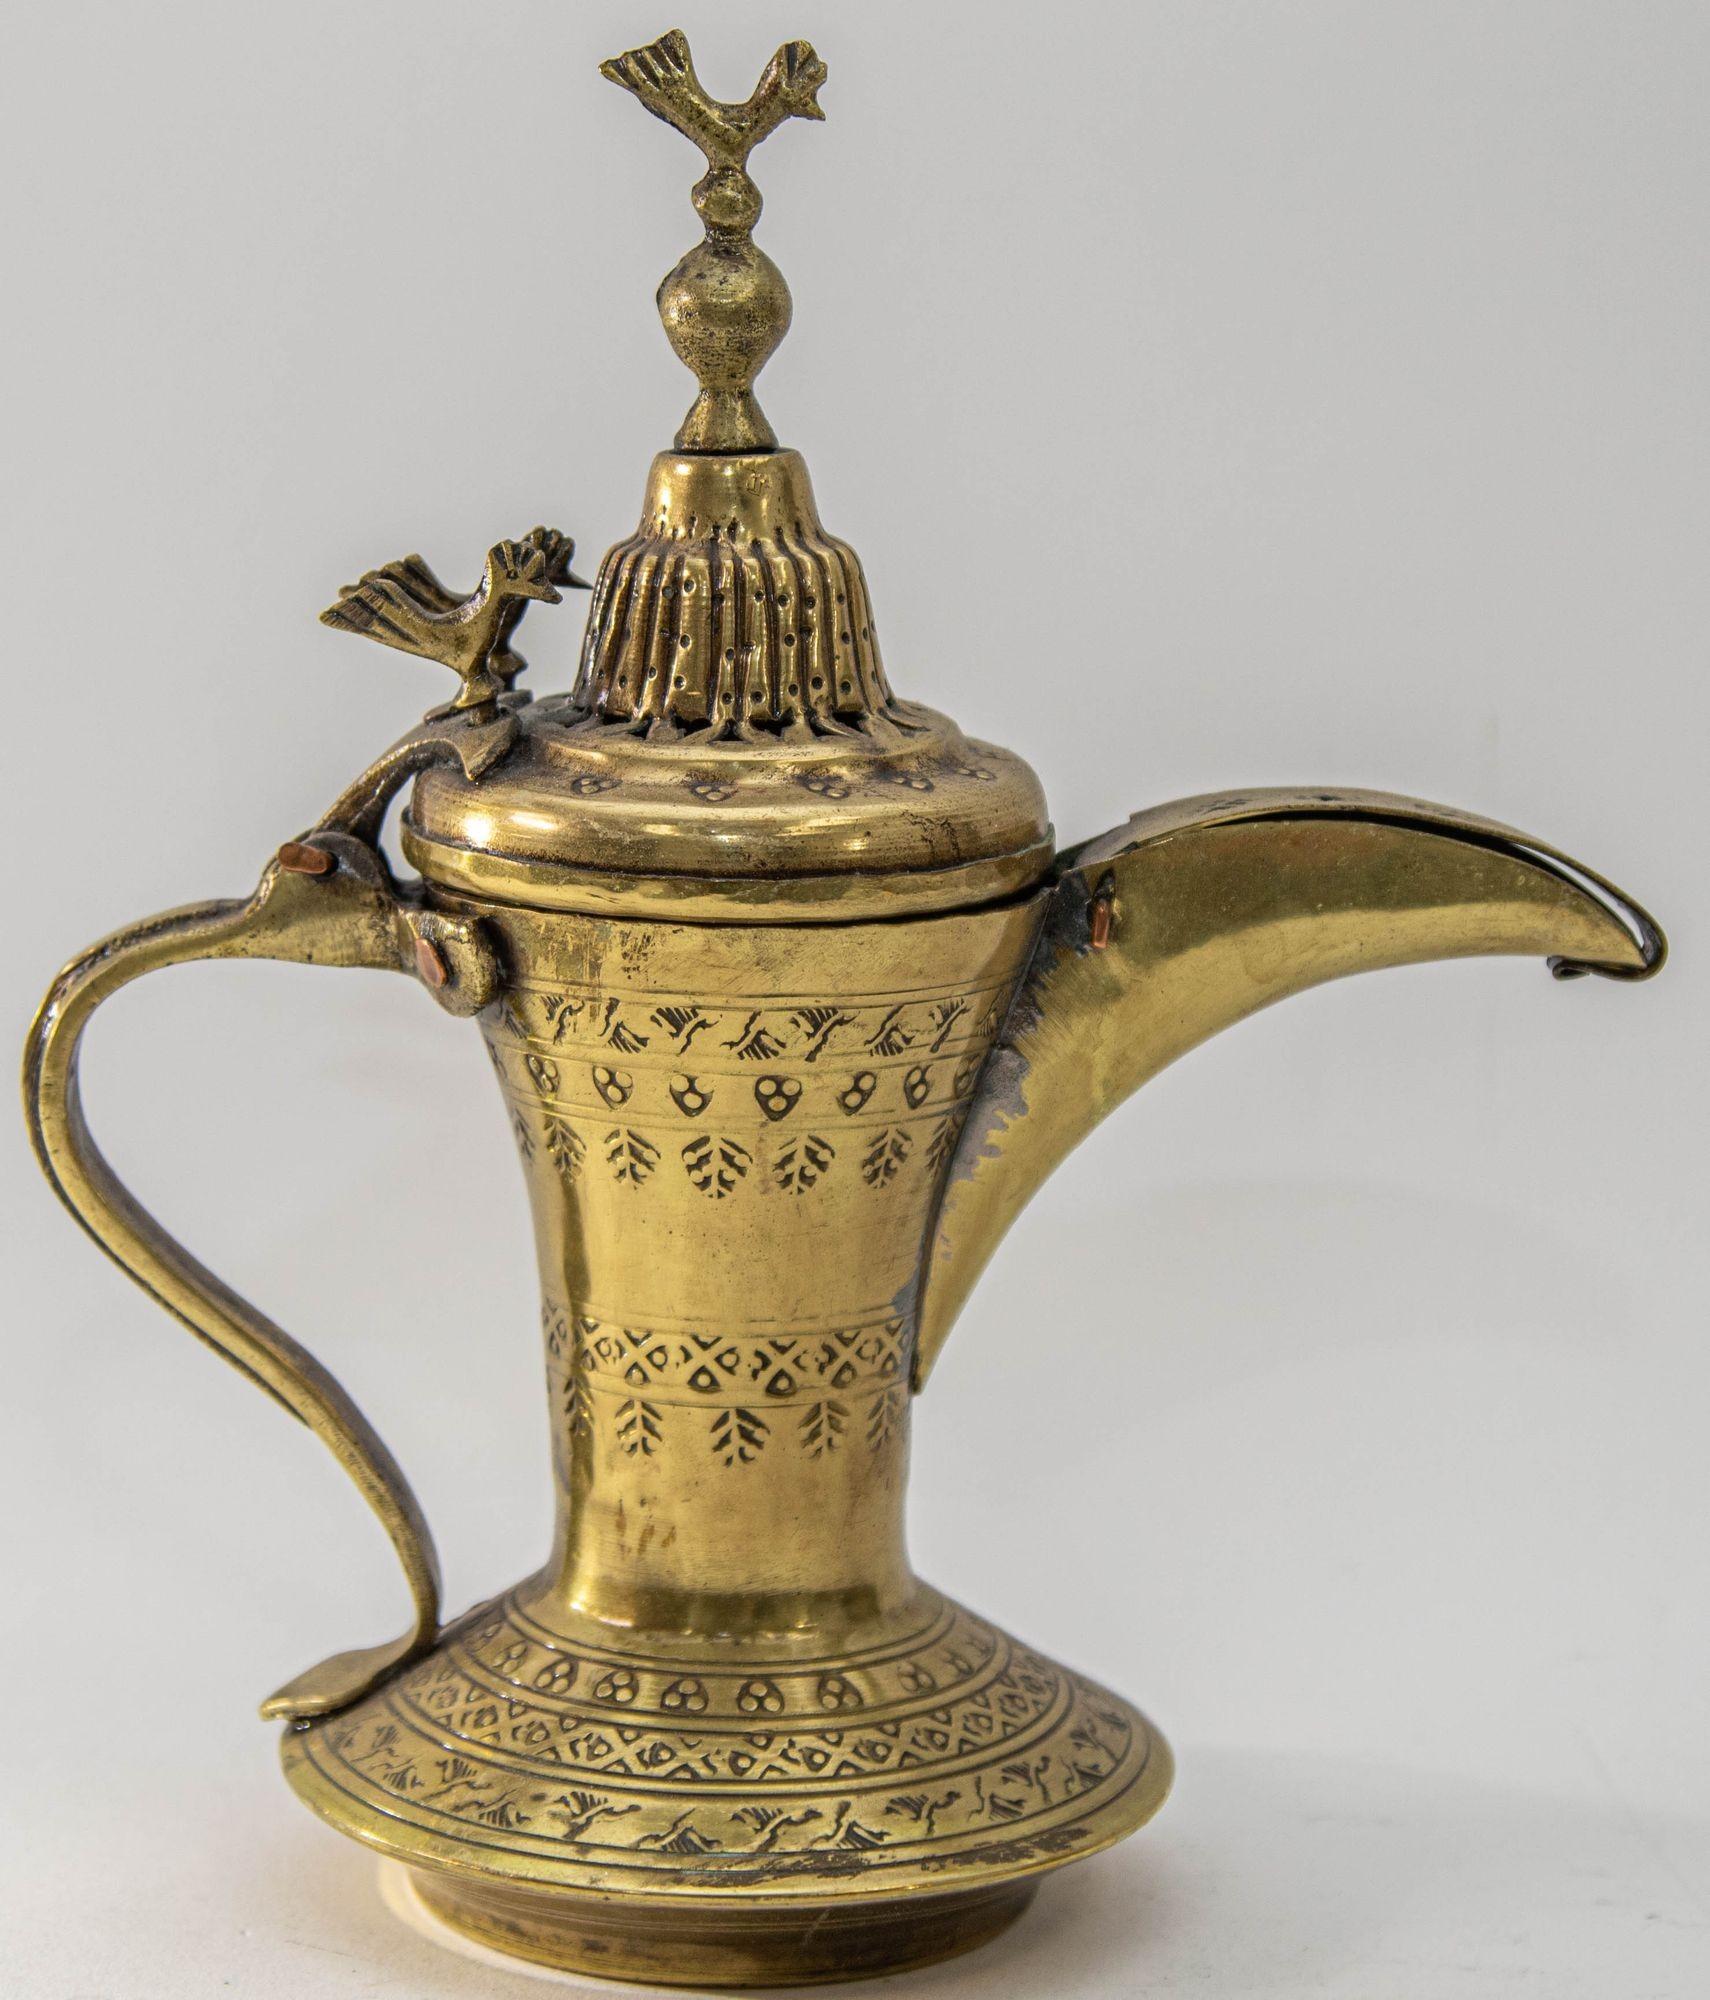 Antique Islamic Dallah Arabic Turkish Brass Coffee Pot or Tea Pot.
Middle Eastern Dallah Arabic brass coffee pot with birds and geometric etched tribal decorations.
Design features a beautiful engraved Nomadic motifs on the lid and on the body of